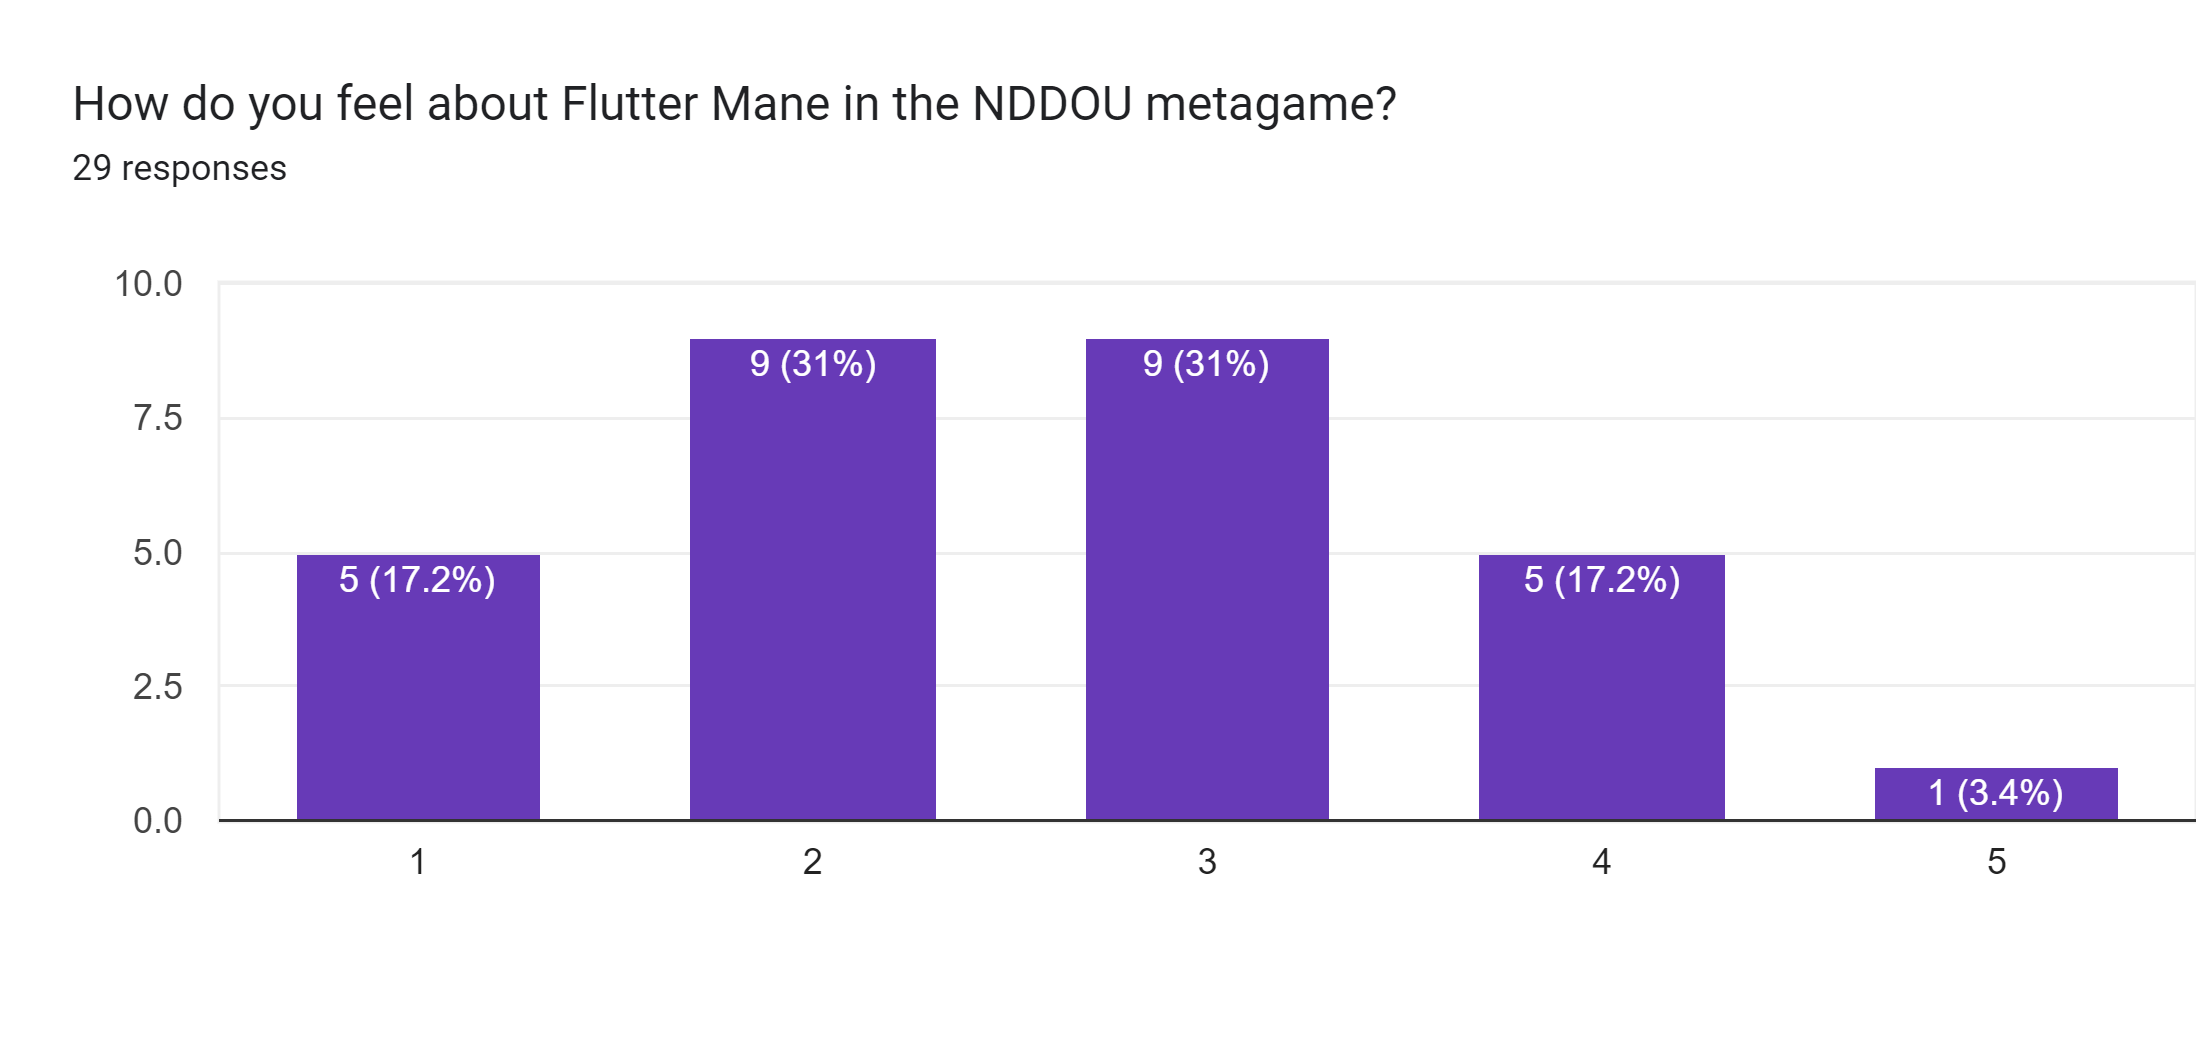 Forms response chart. Question title: How do you feel about Flutter Mane in the NDDOU metagame?. Number of responses: 29 responses.